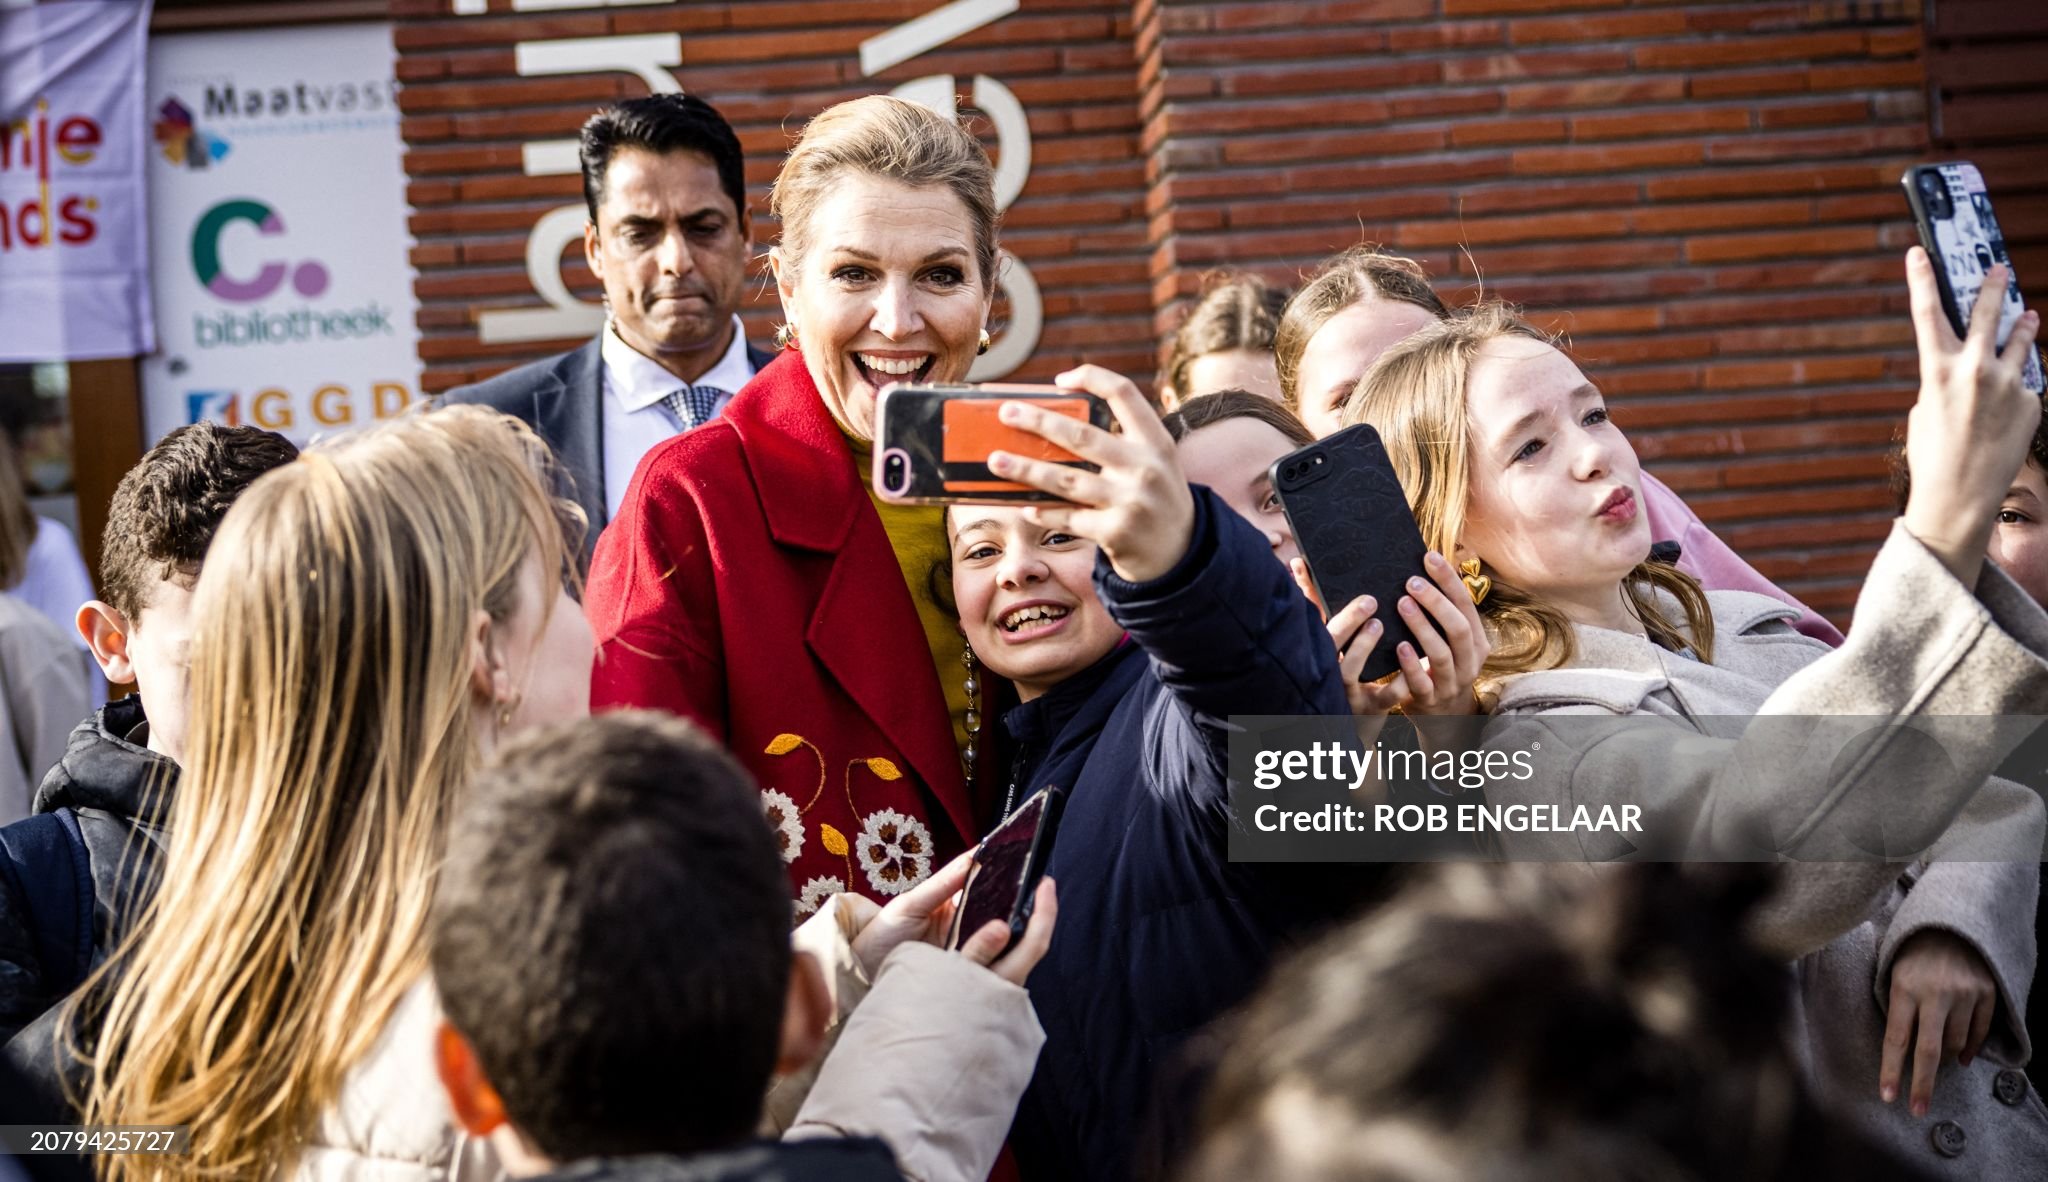 netherlands-royals-queen-maxima-volunteer-in-a-kitchen-during-the-20th-edition-of-nldoet-the.jpg?s=2048x2048&w=gi&k=20&c=-nYh1DeWx9mkNftqMBTIbk7WzOdxmTBMpTlc7pvsNP8=